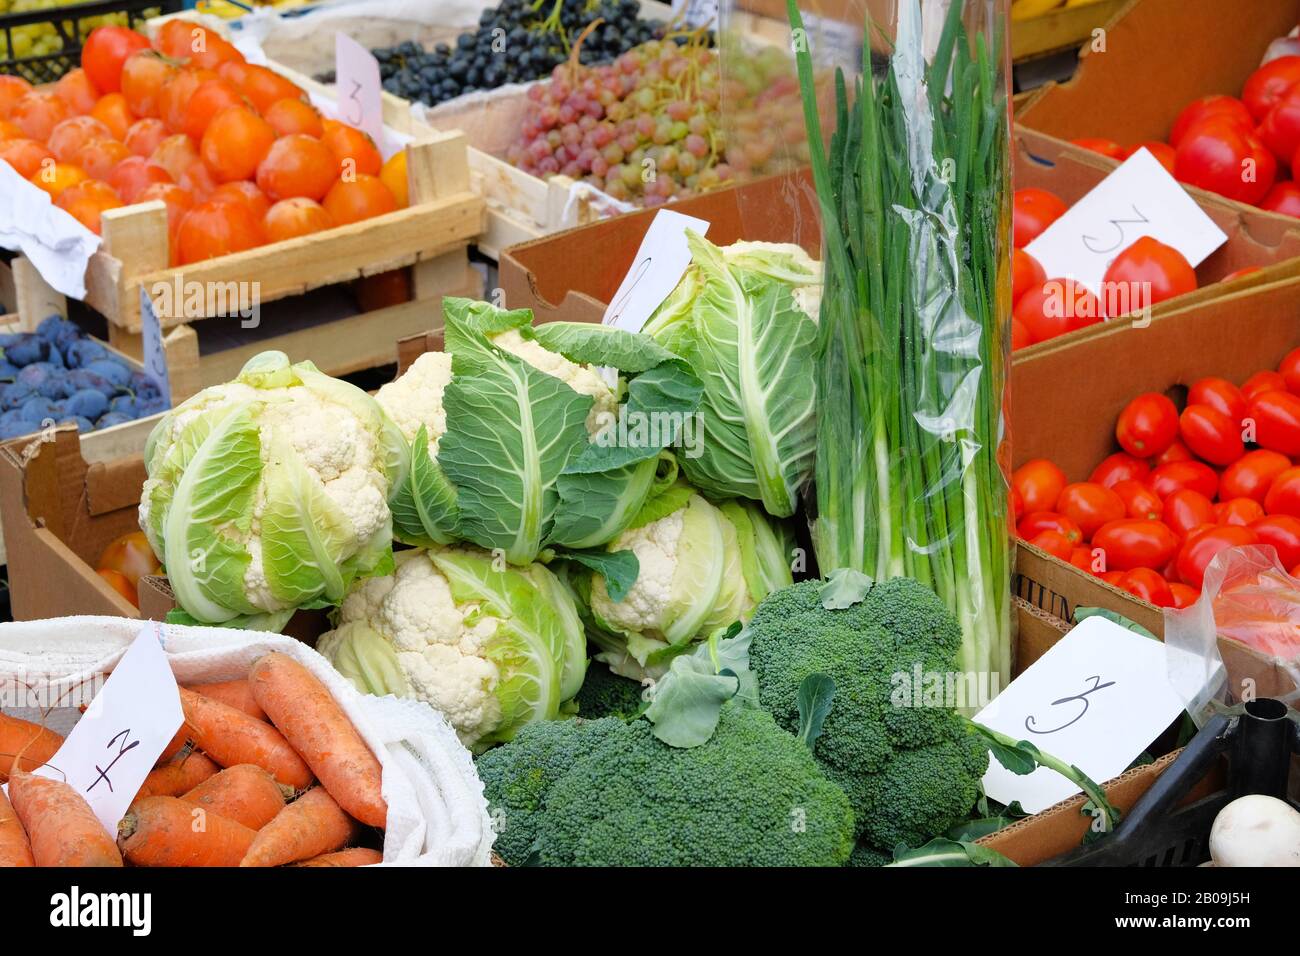 Vegetables are sold in mediterranean farmers fair. Healthy local food market. Broccoli, cauliflower, tomatoes, green onions, carrots, persimmon, grape Stock Photo